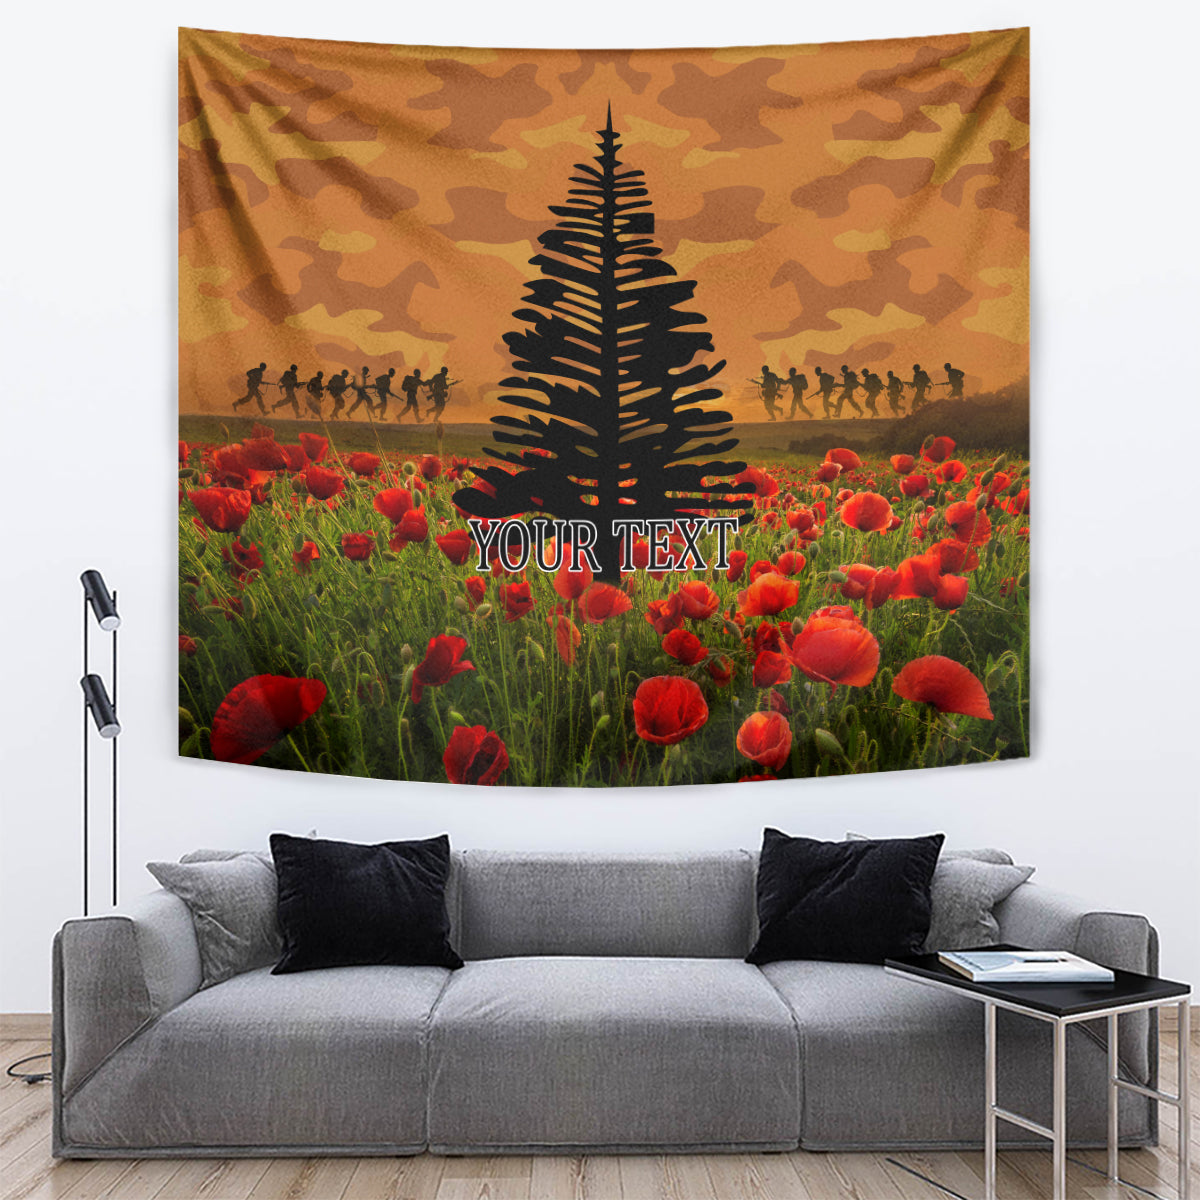 Norfolk Island ANZAC Day Personalised Tapestry with Poppy Field LT9 Art - Polynesian Pride